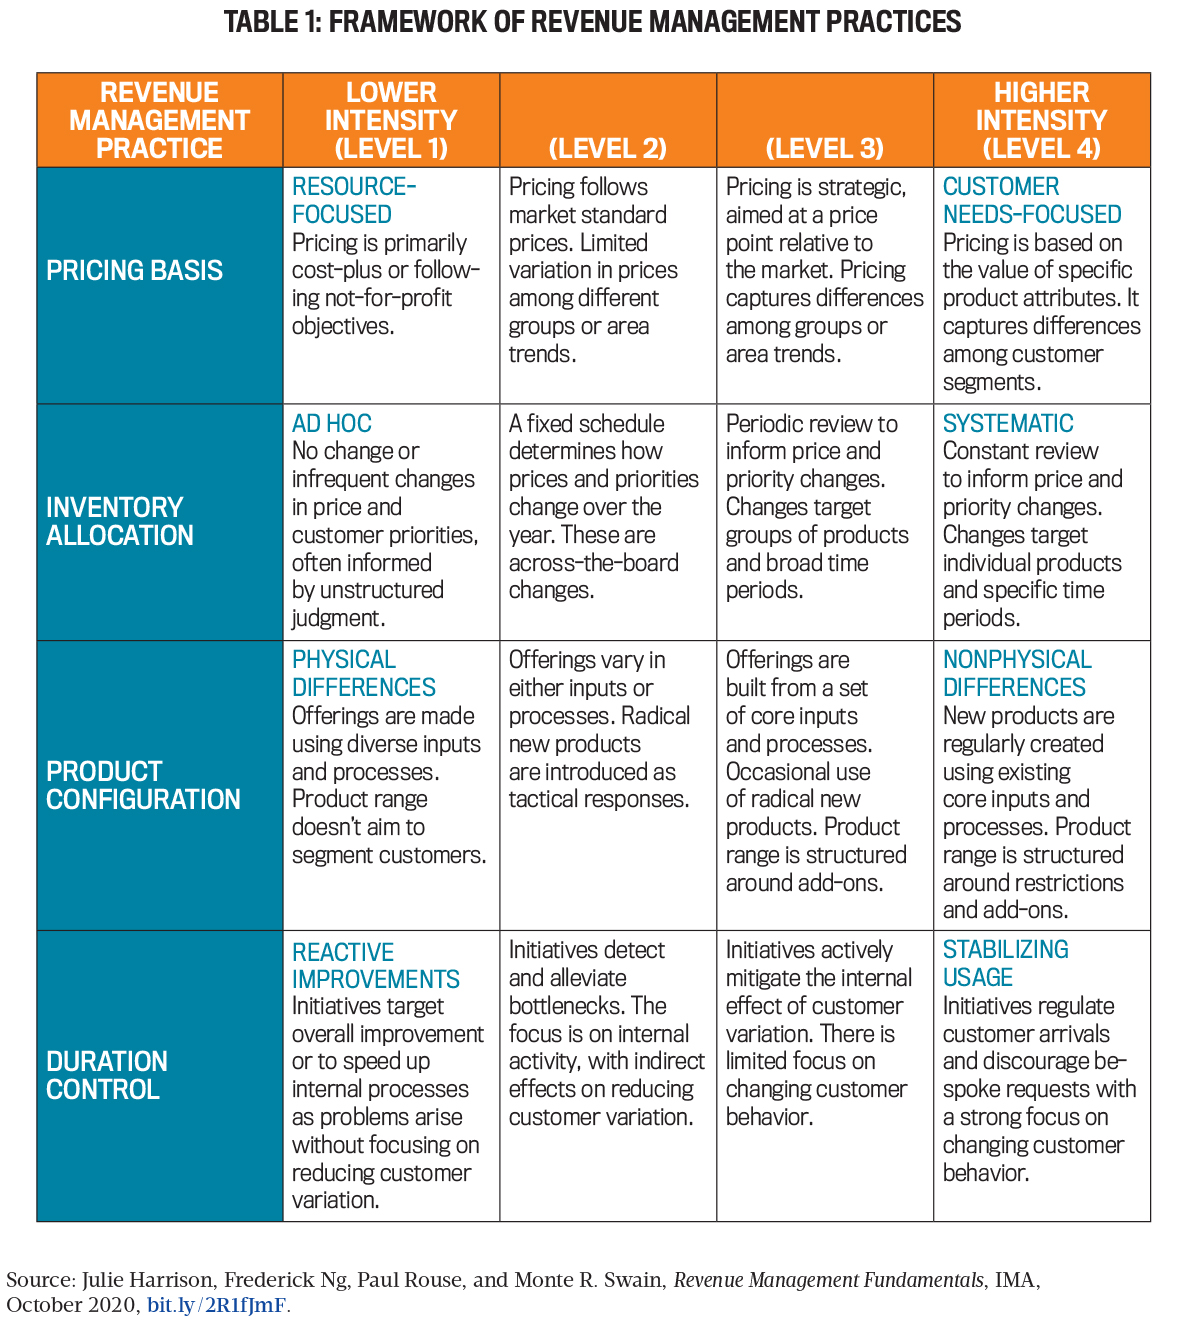 table of framework of revenue management practices